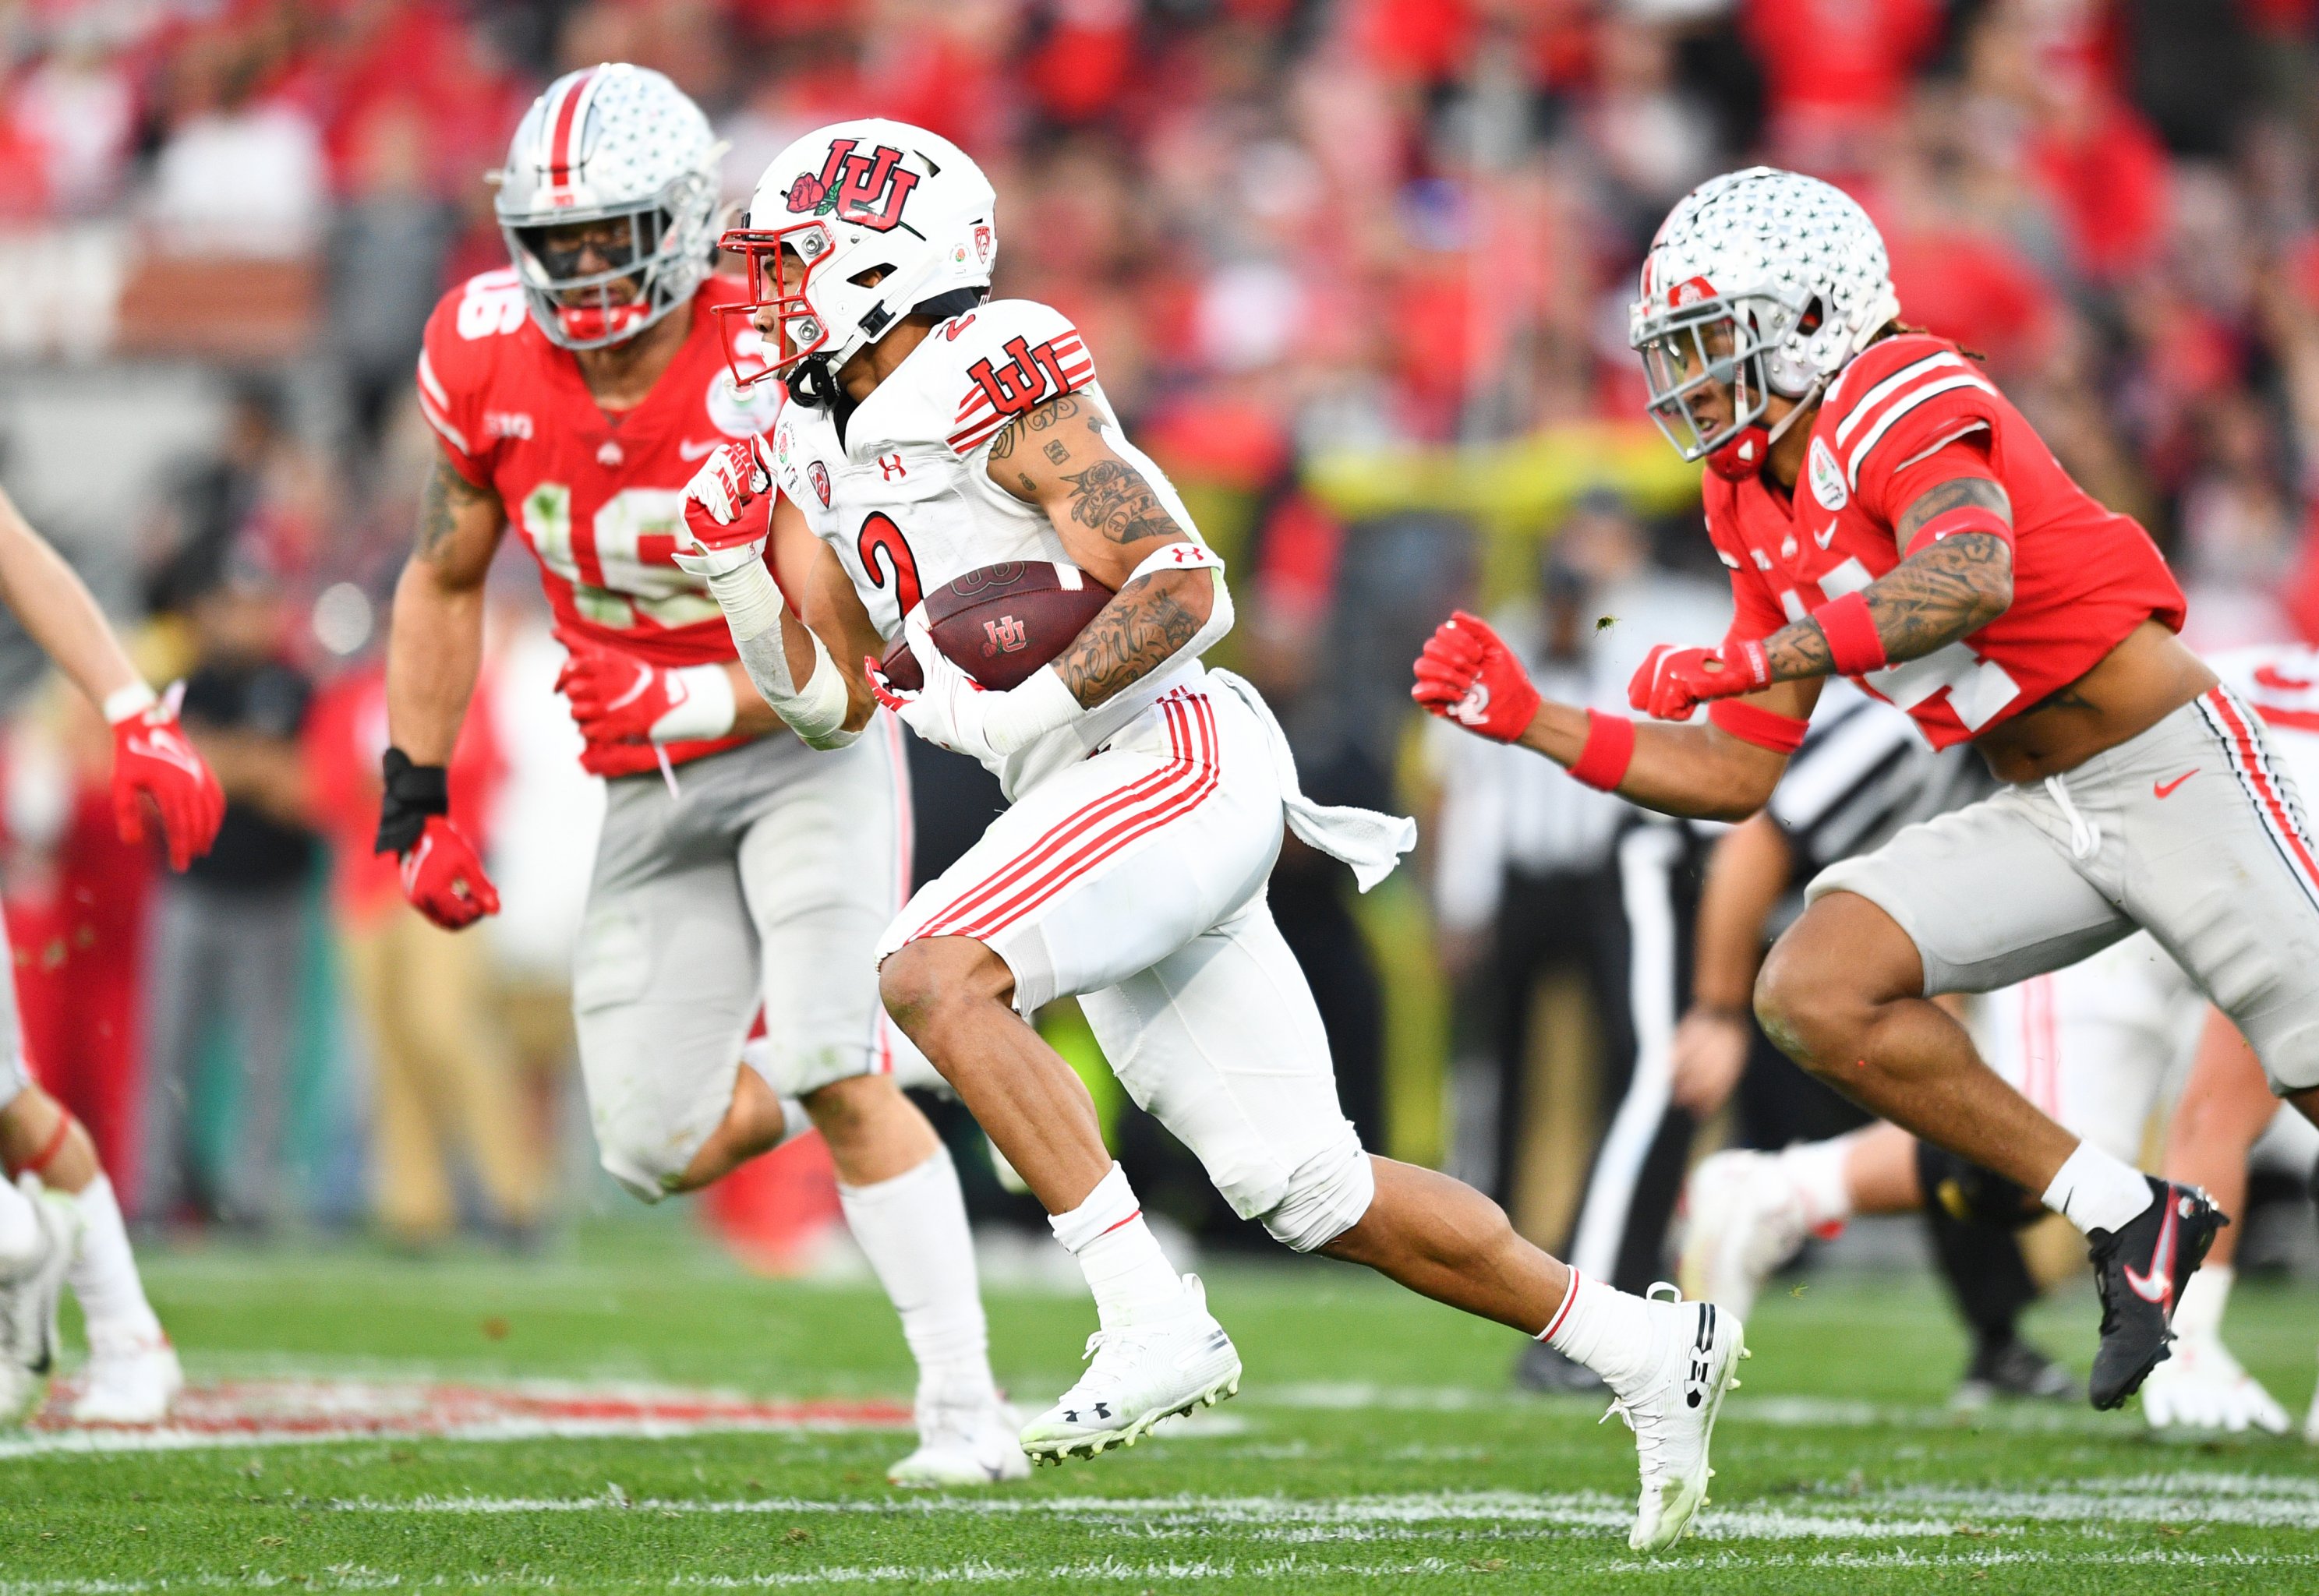 Ncaa Football Strength Of Schedule 2022 Ranking College Football's 9 Easiest Schedules For 2022 Contenders |  Bleacher Report | Latest News, Videos And Highlights